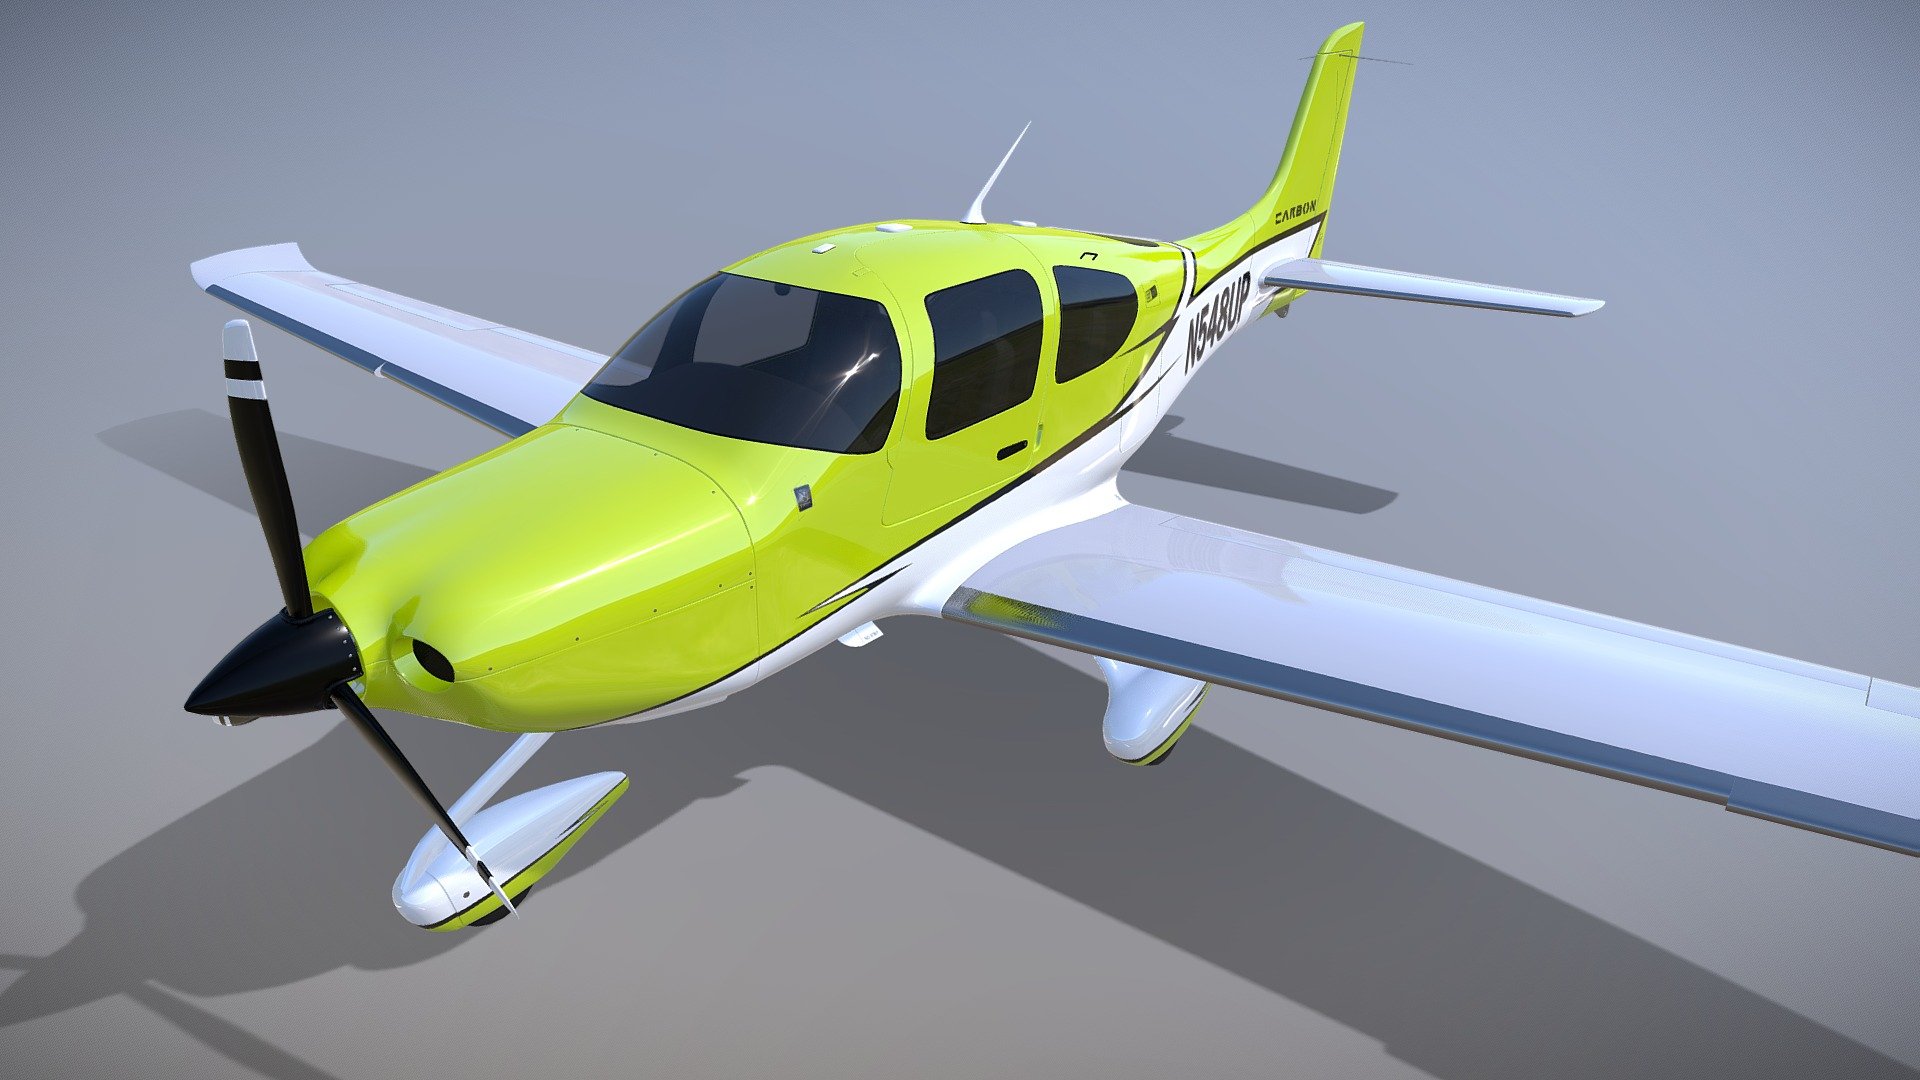 Accurately recreated model of the Cirrus SR-22 aircraft.

Download link in comments below 3d model